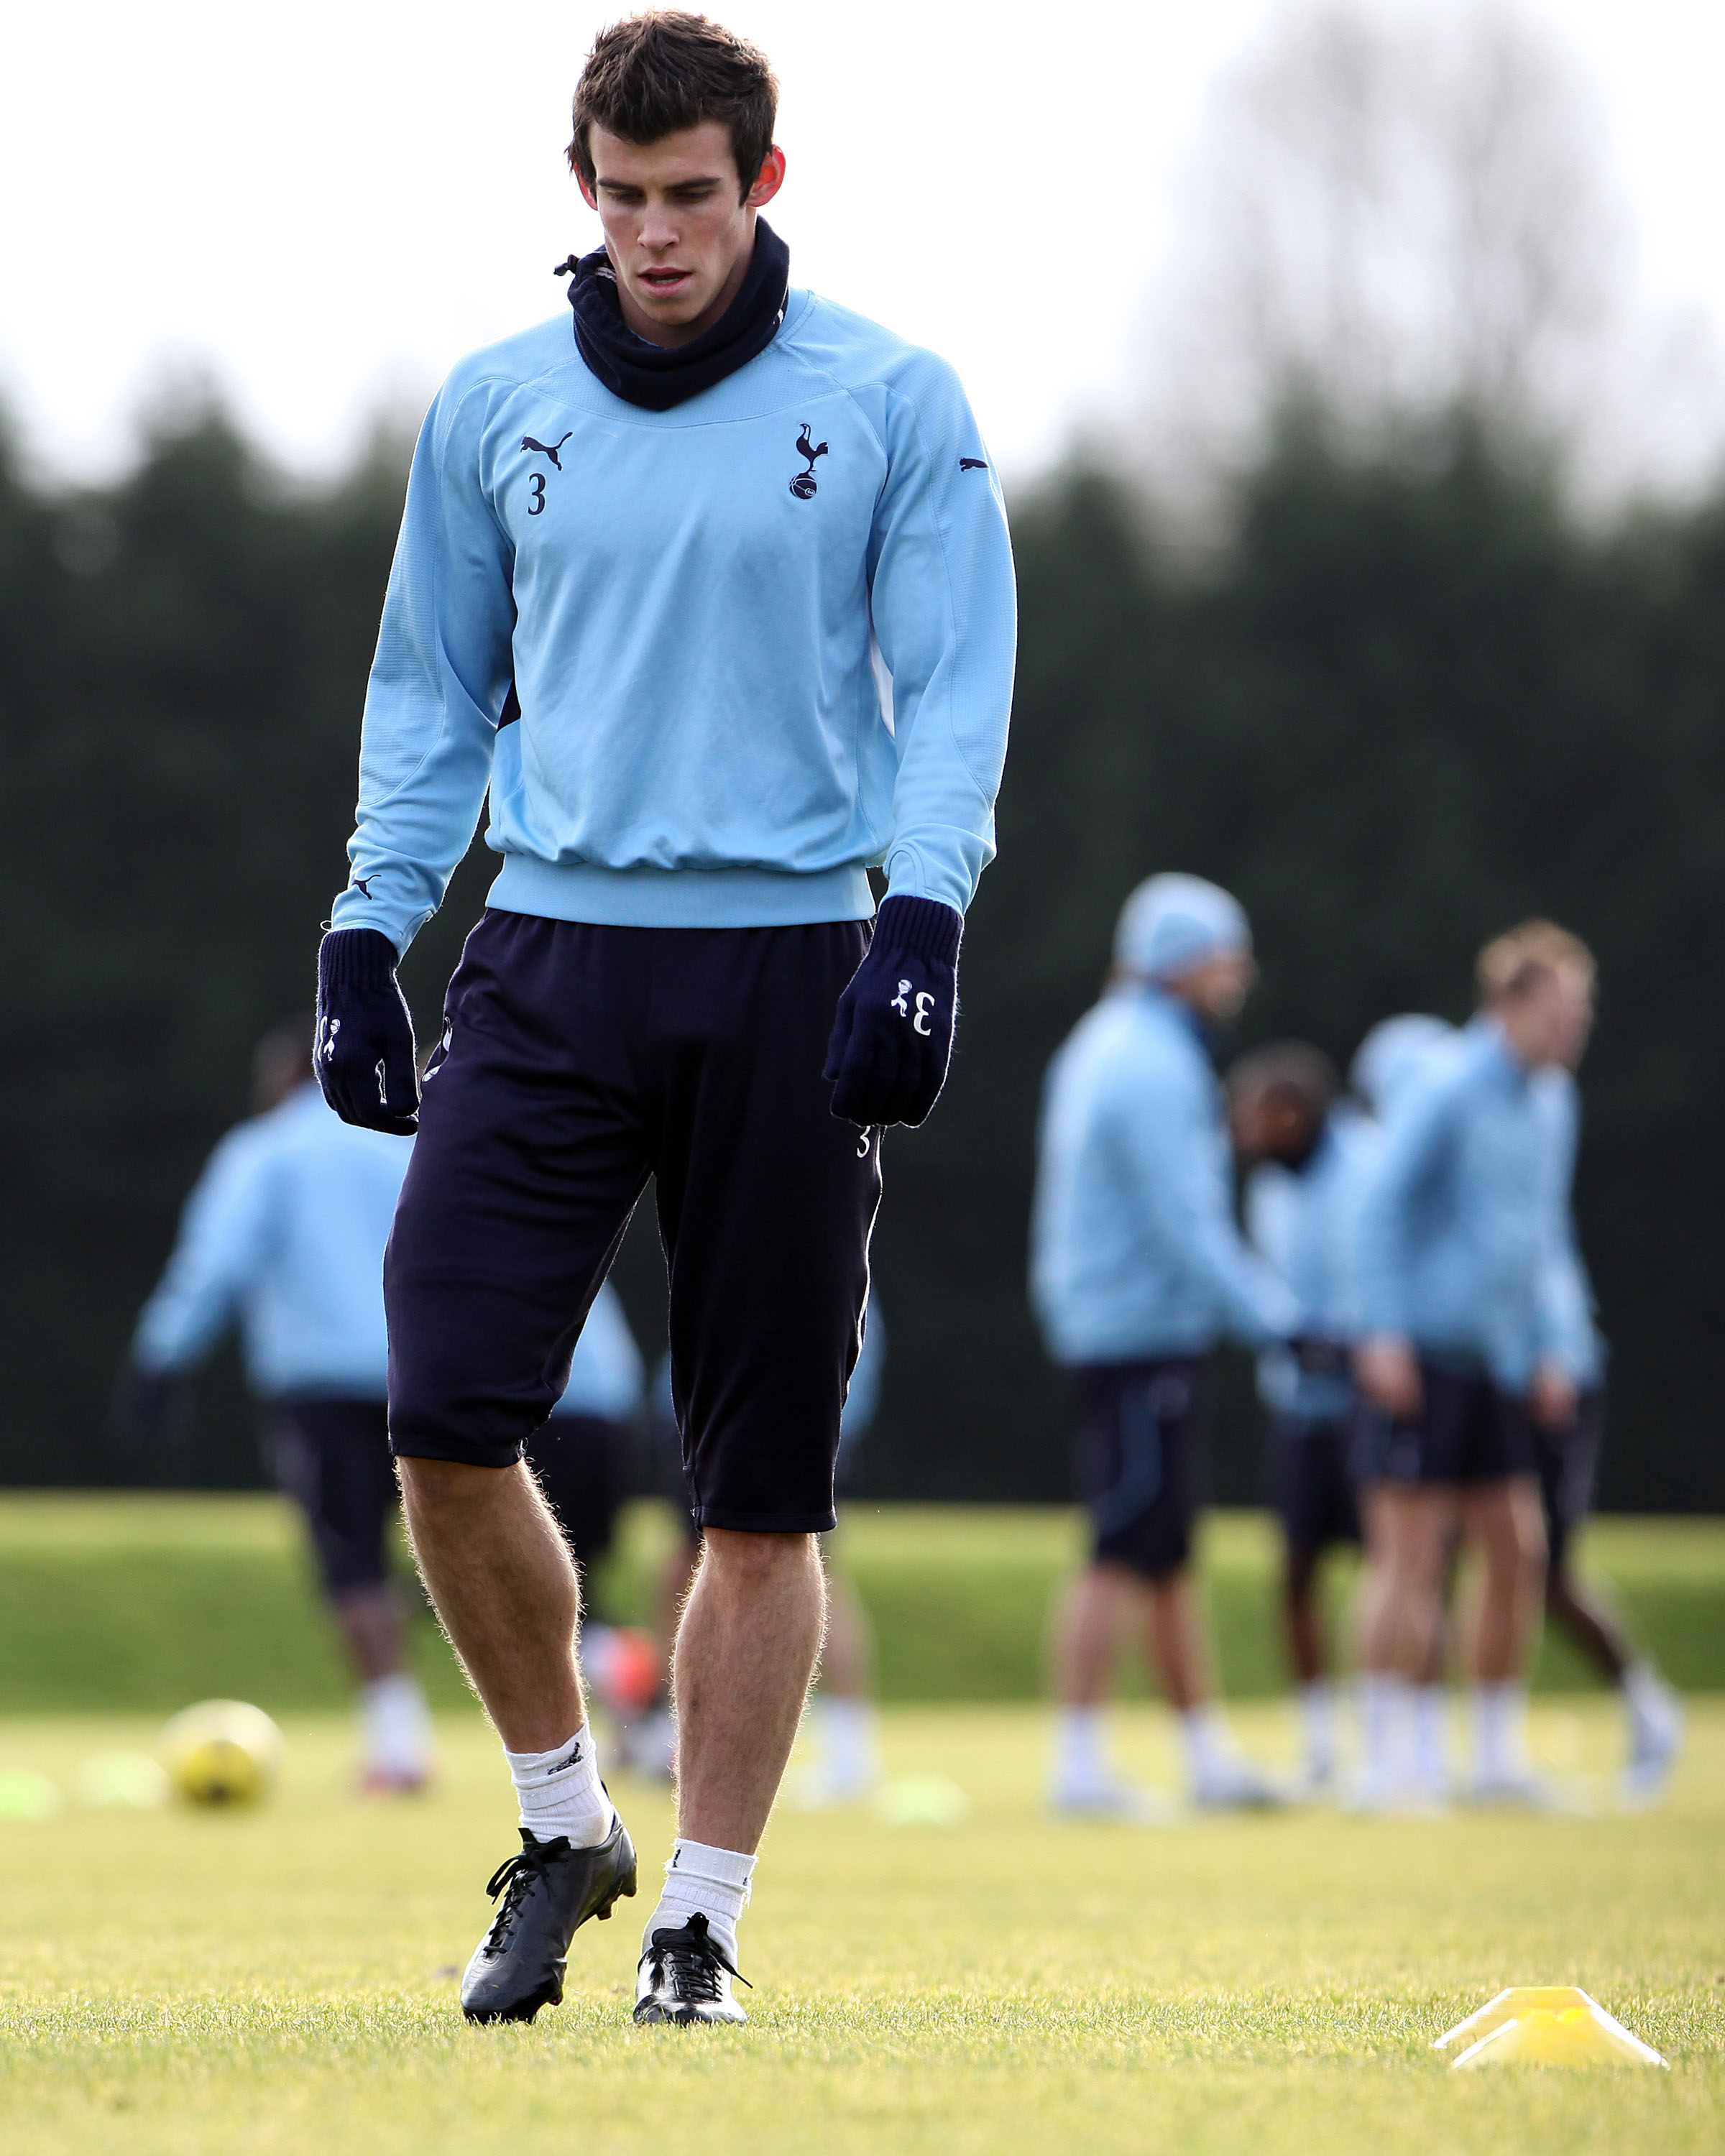 CHIGWELL, UNITED KINGDOM - JANUARY 11: Gareth Bale takes part in a Spurs training session on January 11, 2011 in Chigwell, England. (Photo by Neil Mockford/Getty Images)